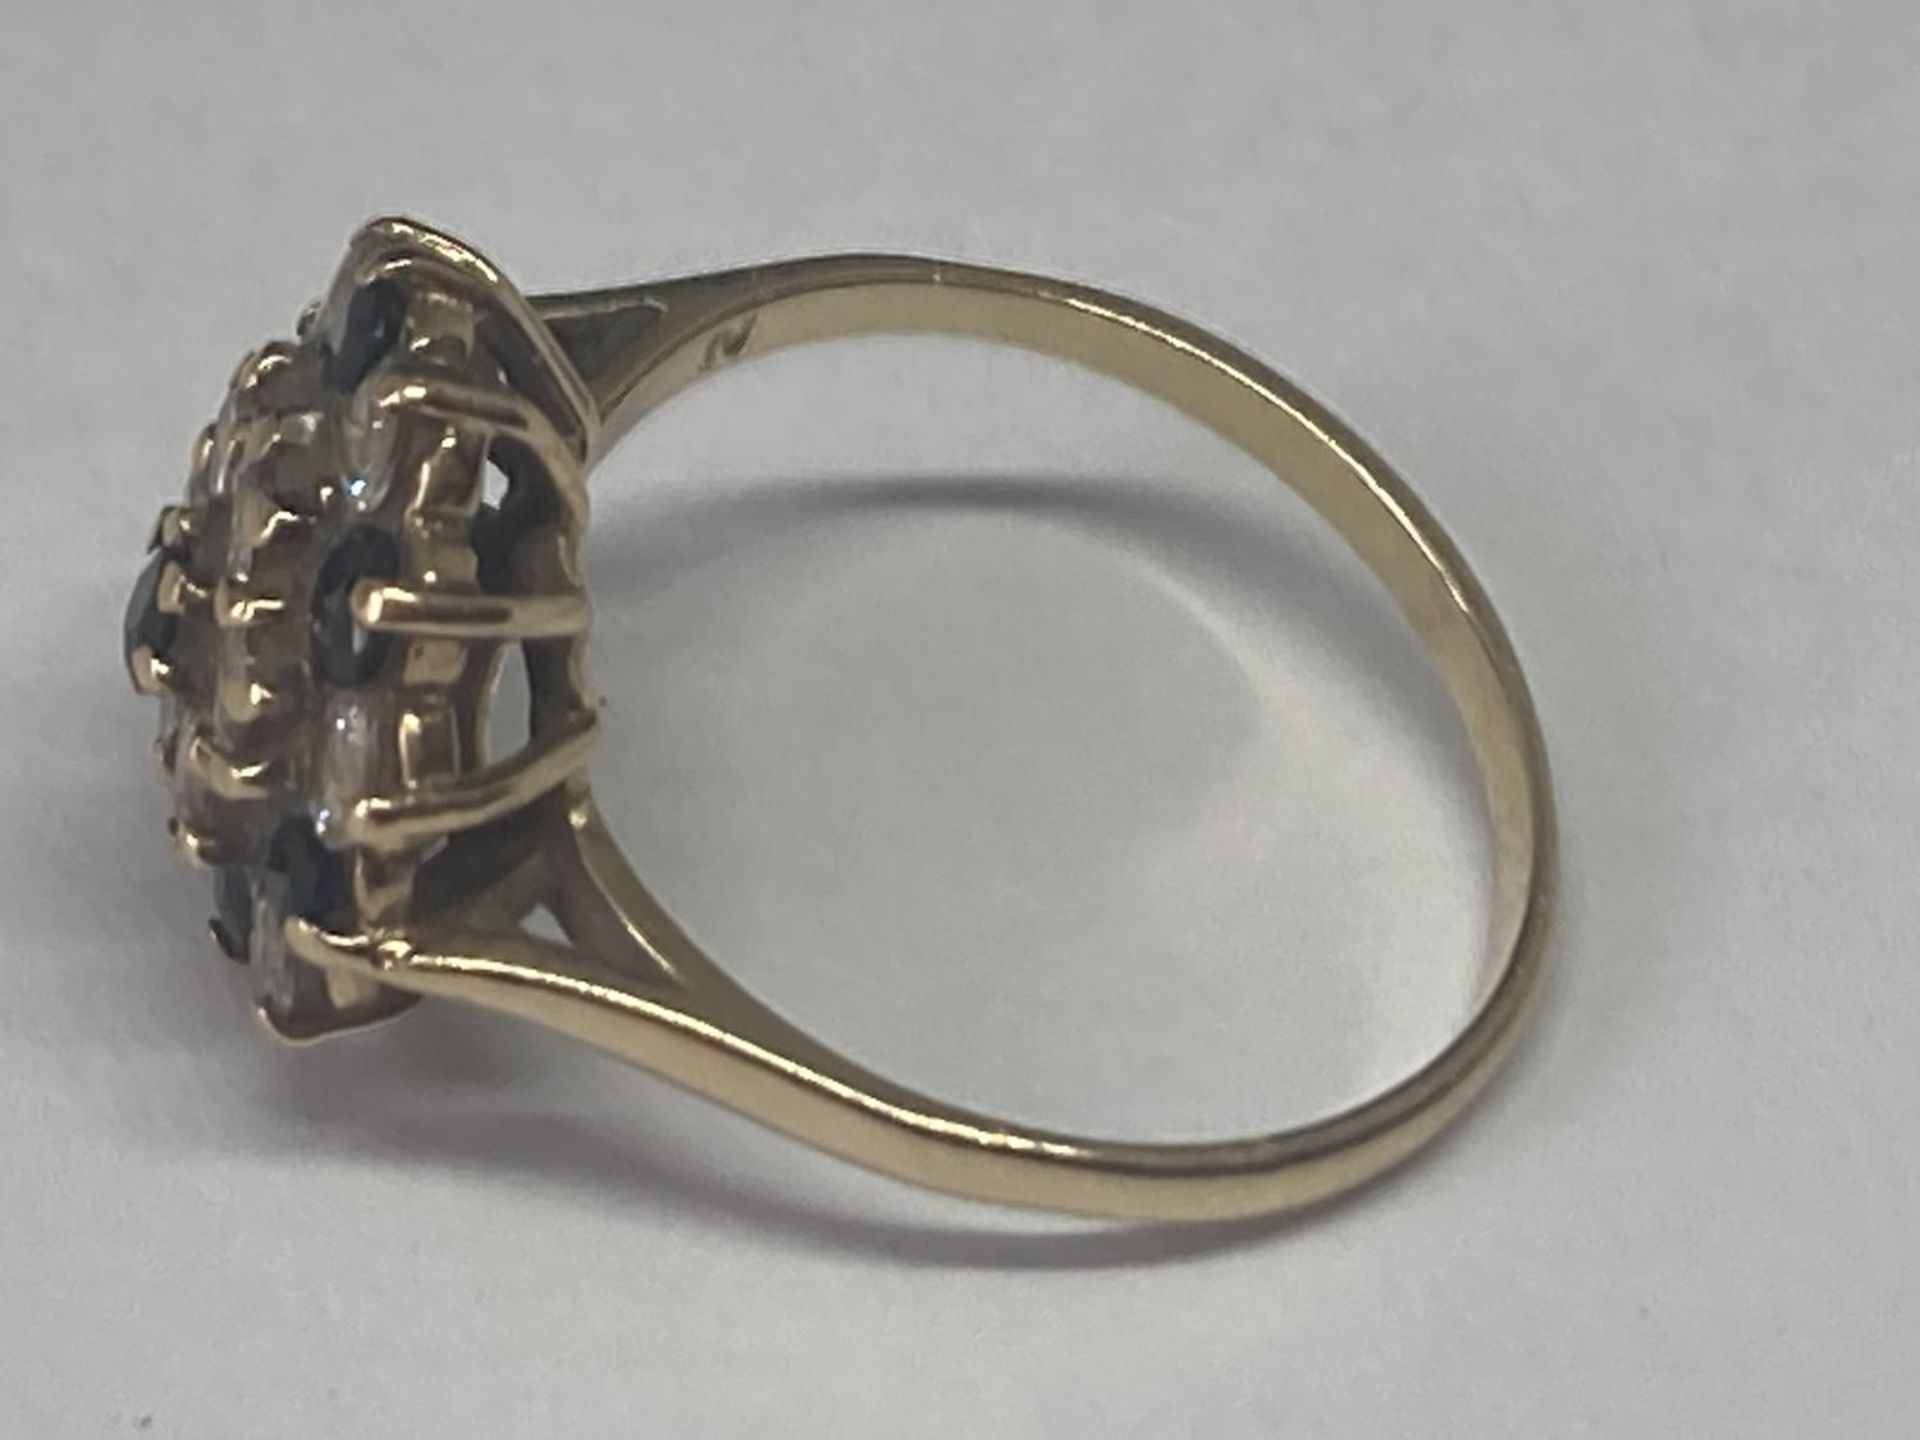 A 9 CARAT GOLD RING WITH SAPPHIRE AND CUBIC ZIRCONIAS IN A CLUSTER DESIGN SIZE M/N - Image 3 of 6